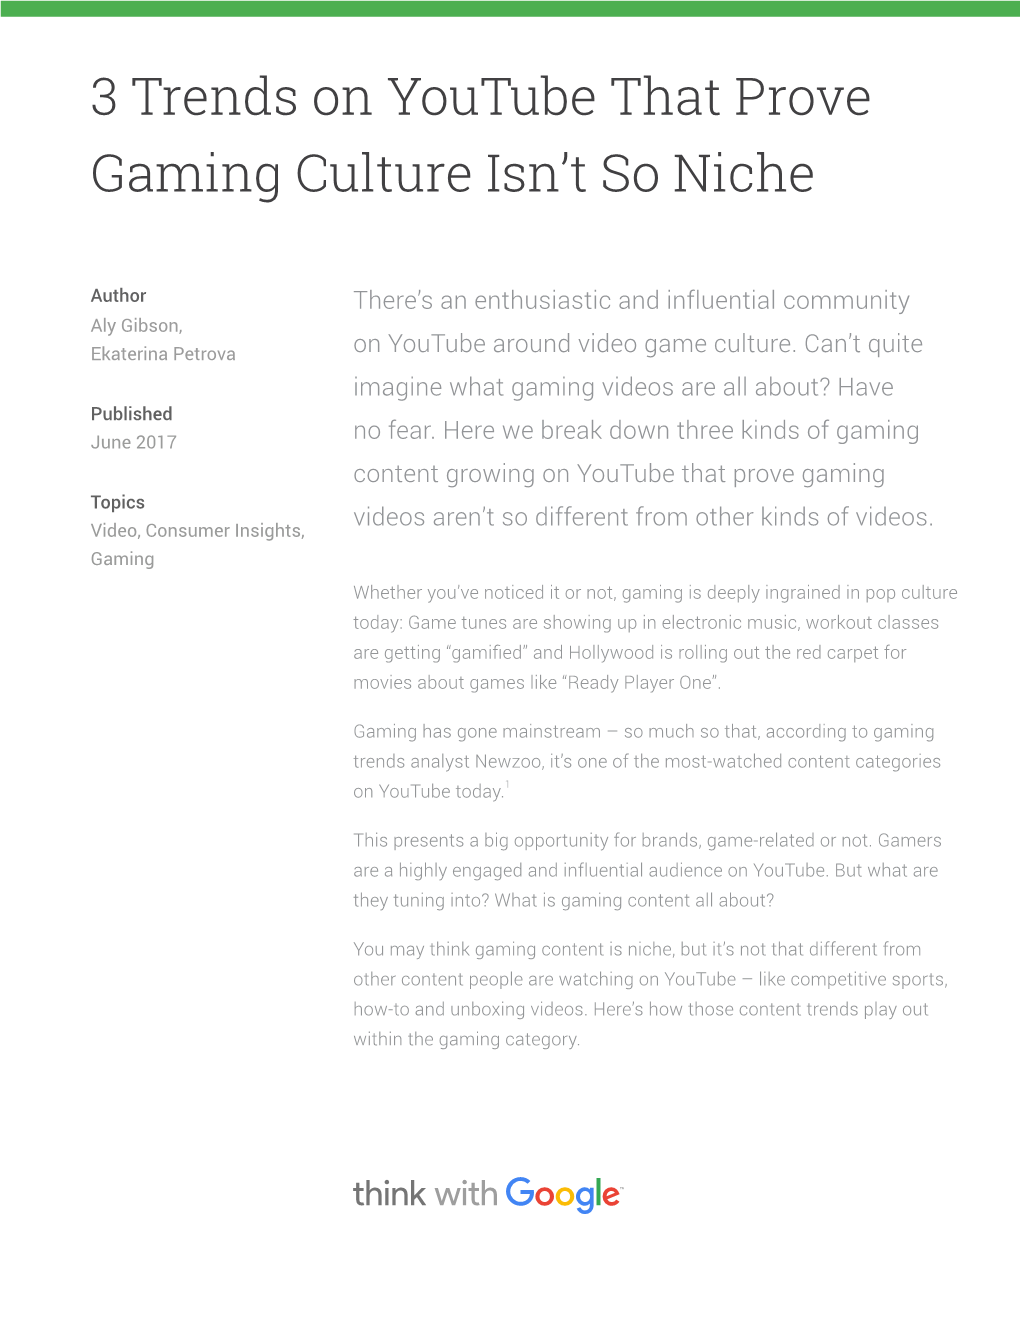 3 Trends on Youtube That Prove Gaming Culture Isn’T So Niche